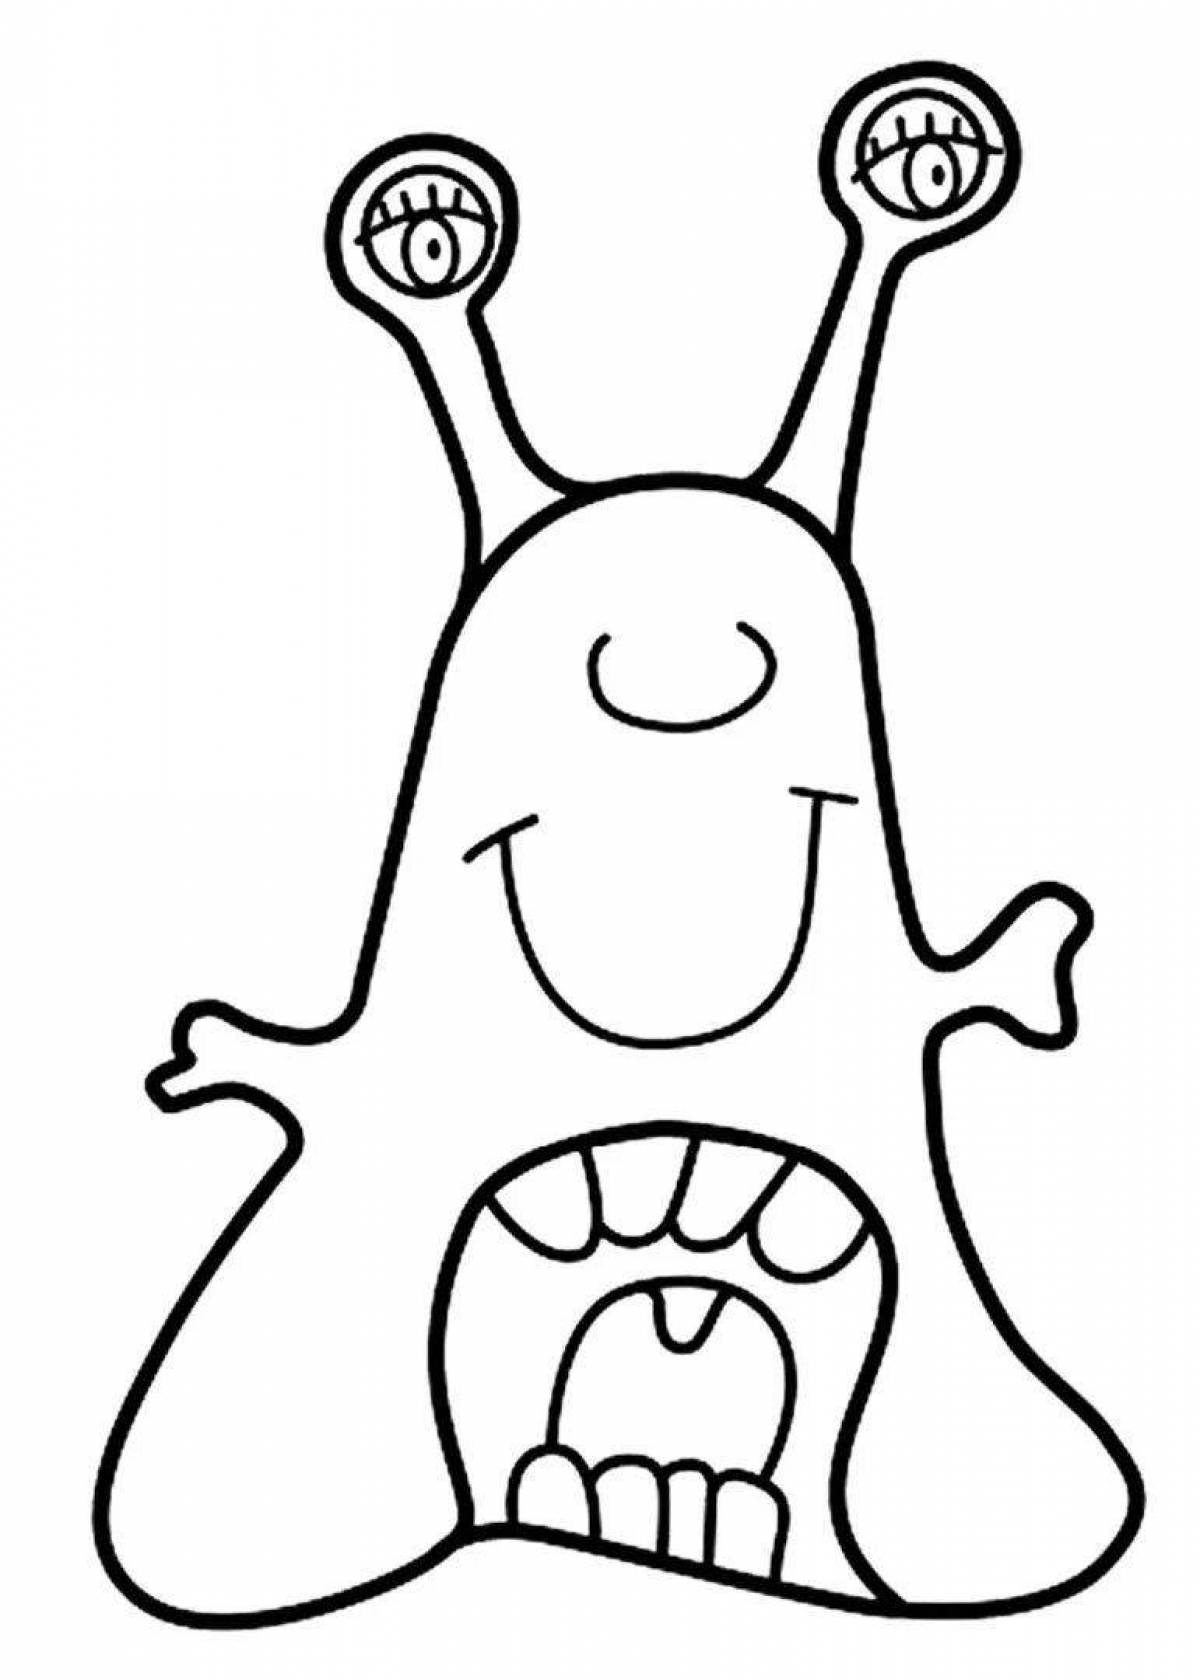 Colour-mad aliens coloring pages for kids